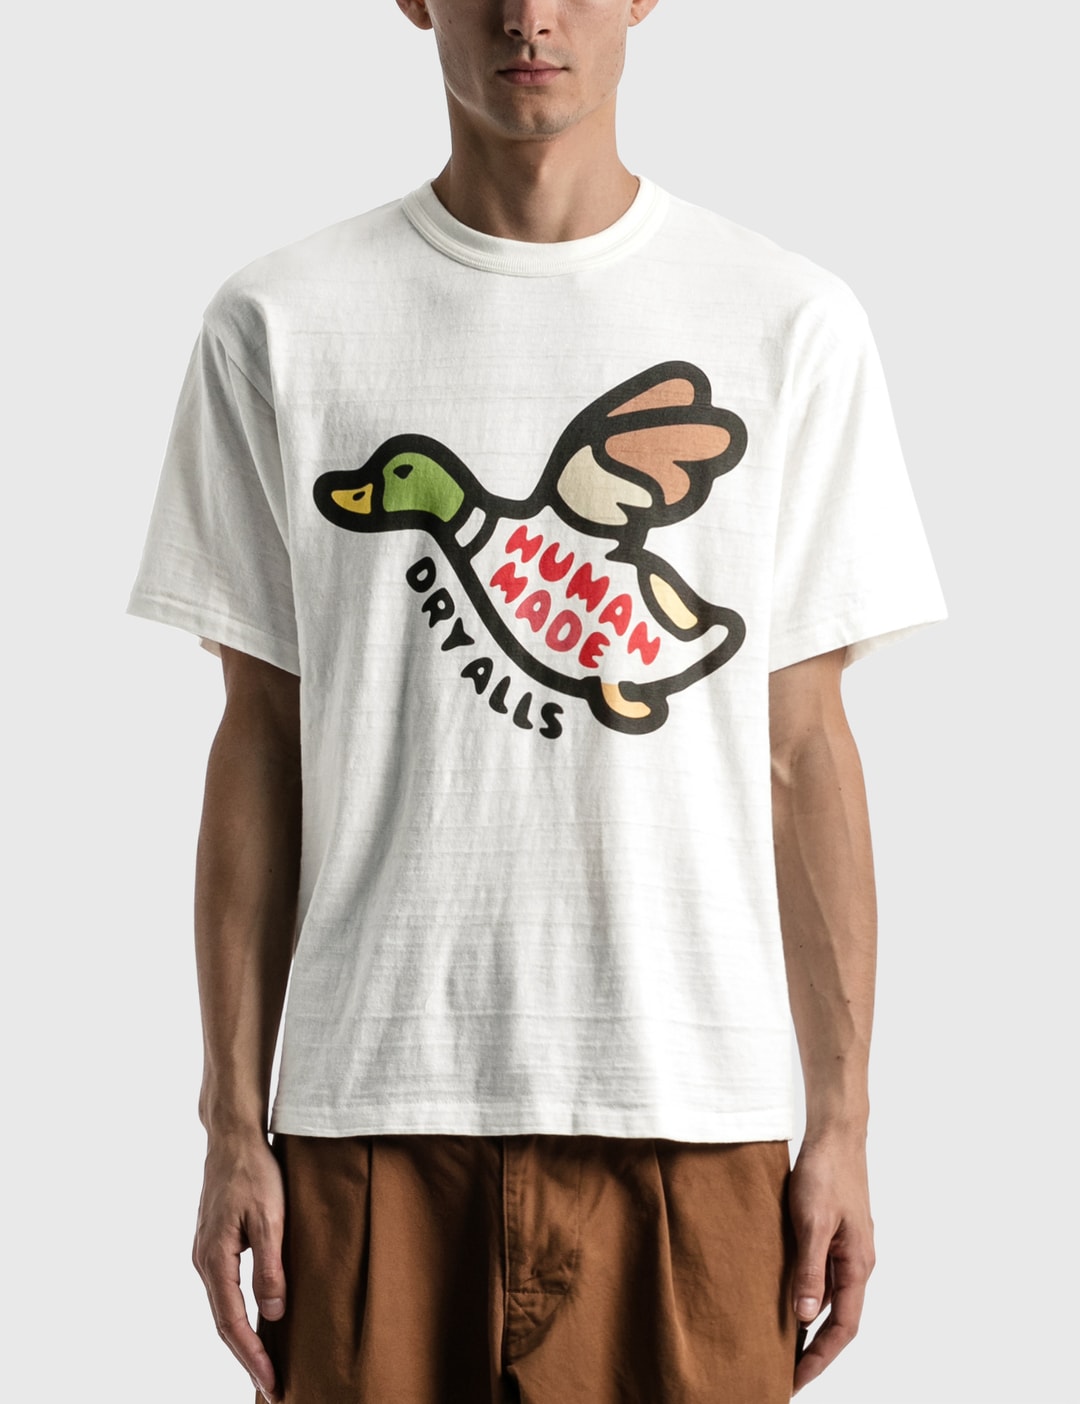 Human Made - T-shirt #2101 | HBX - Globally Curated Fashion and ...